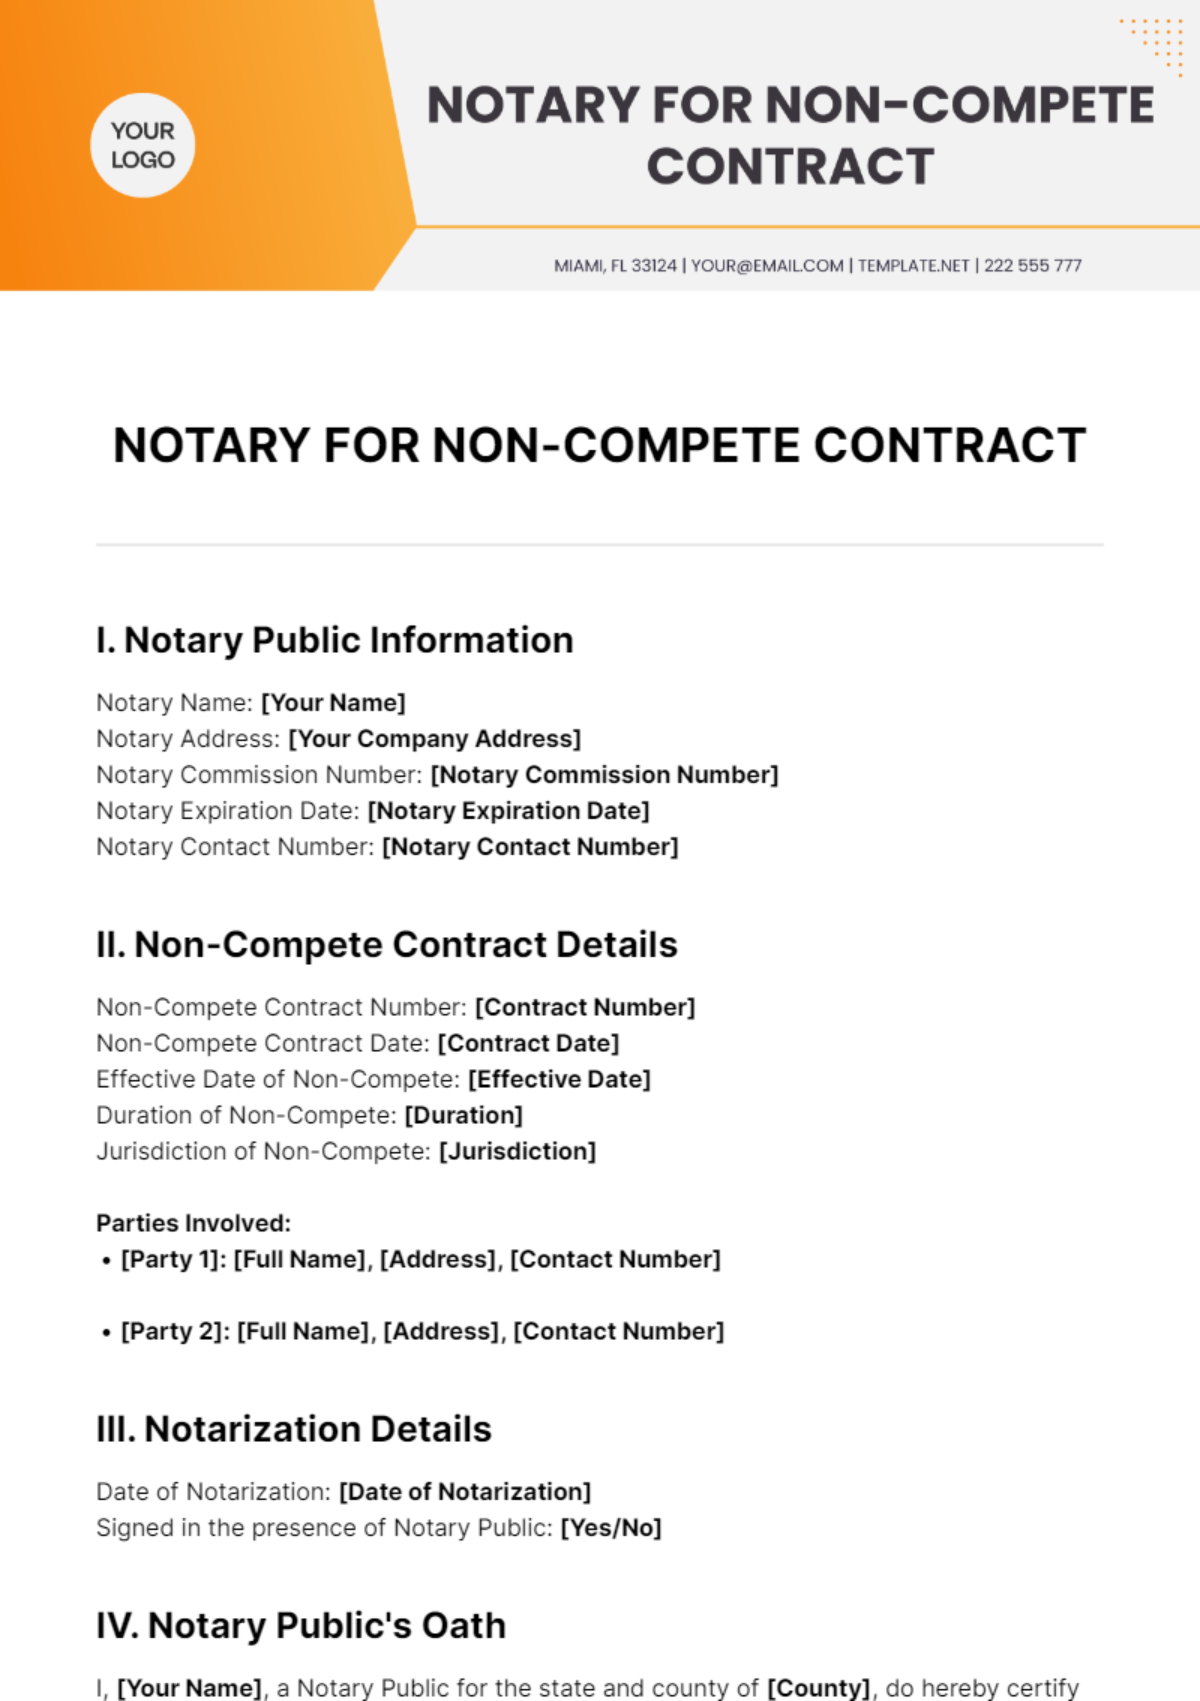 Free Notary for Non-Compete Contract Template